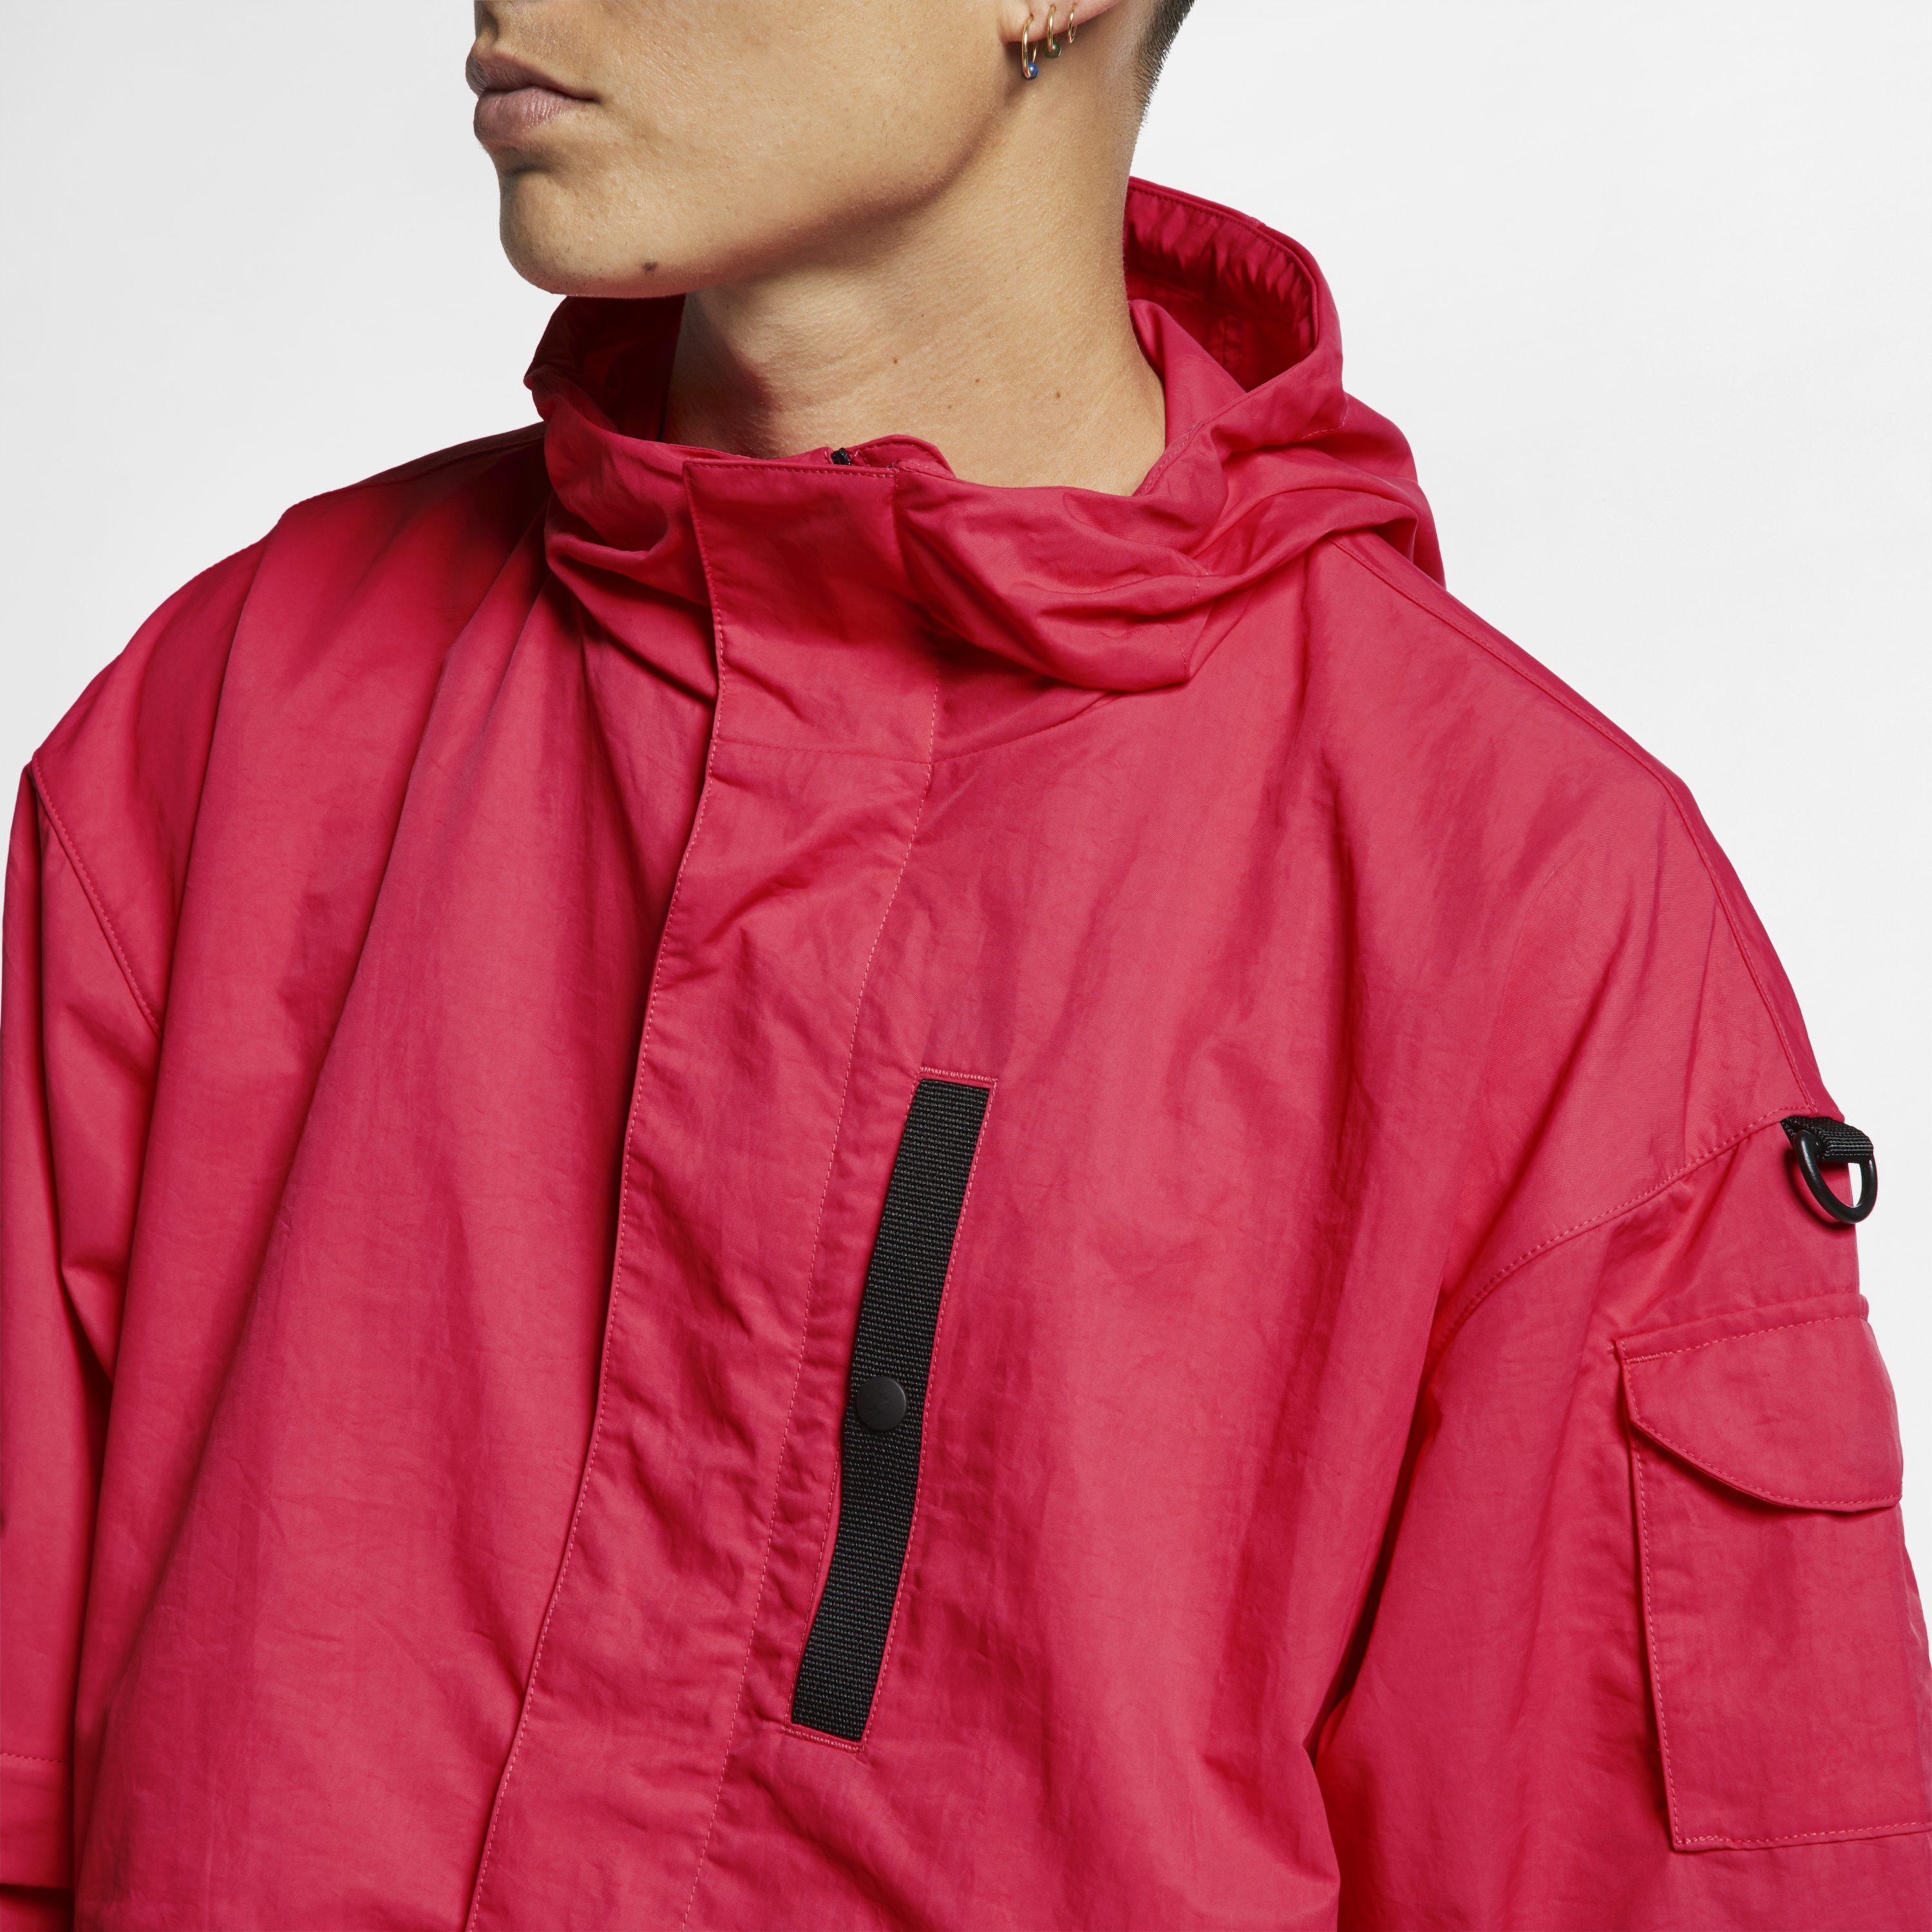 Nike Synthetic Quest Anorak Jacket in Red for Men - Lyst